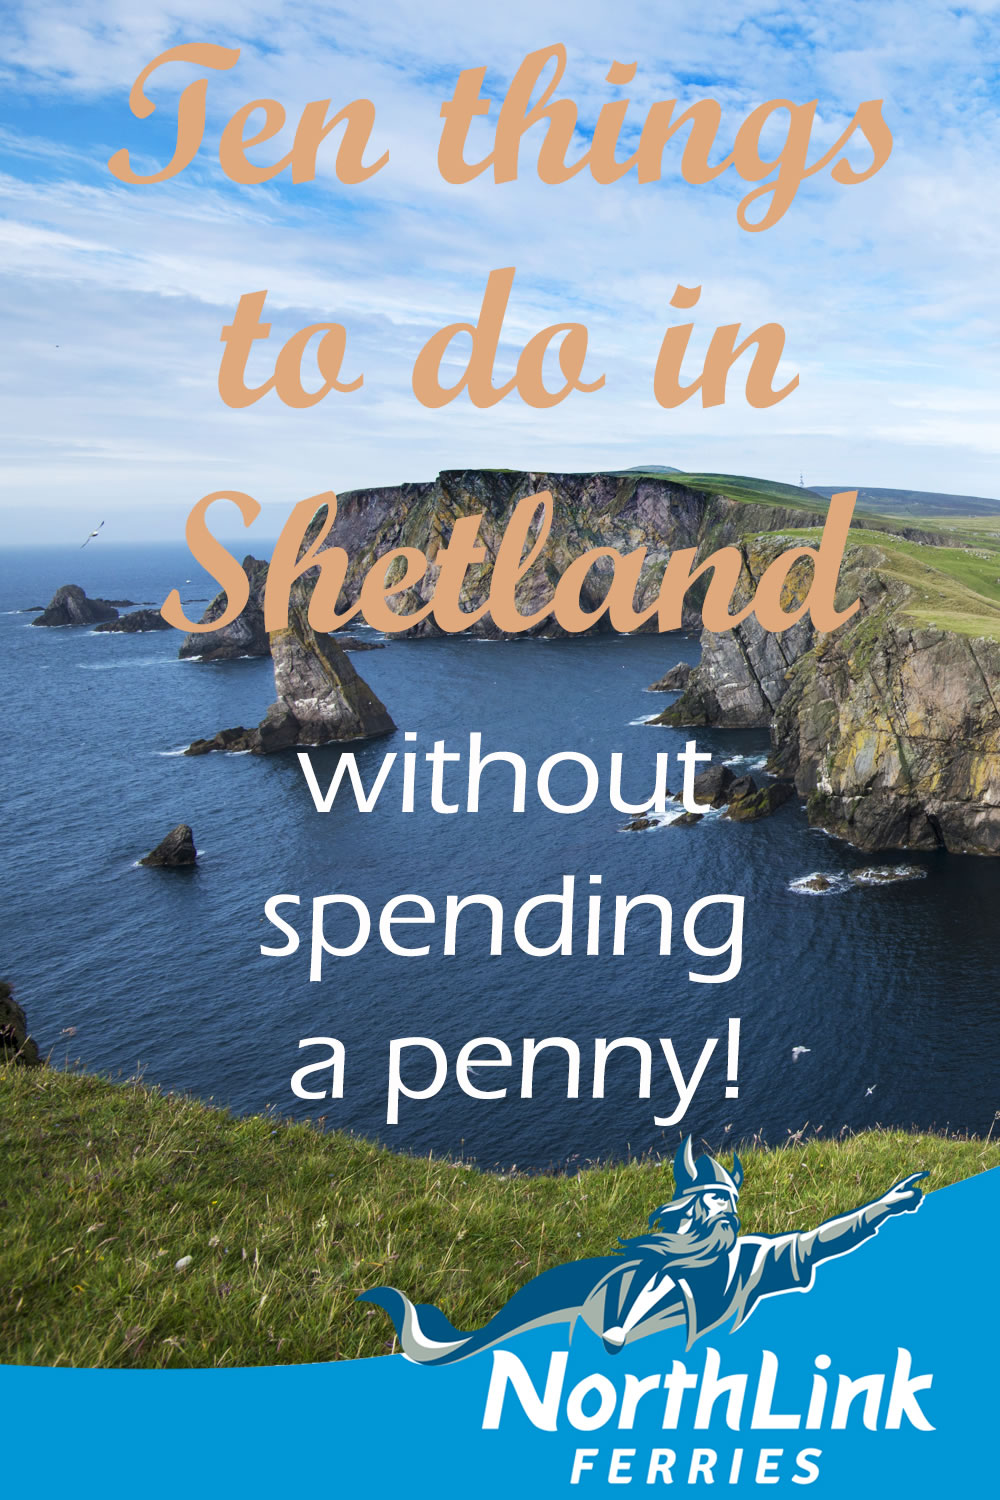 Ten things to do in Shetland without spending a penny!